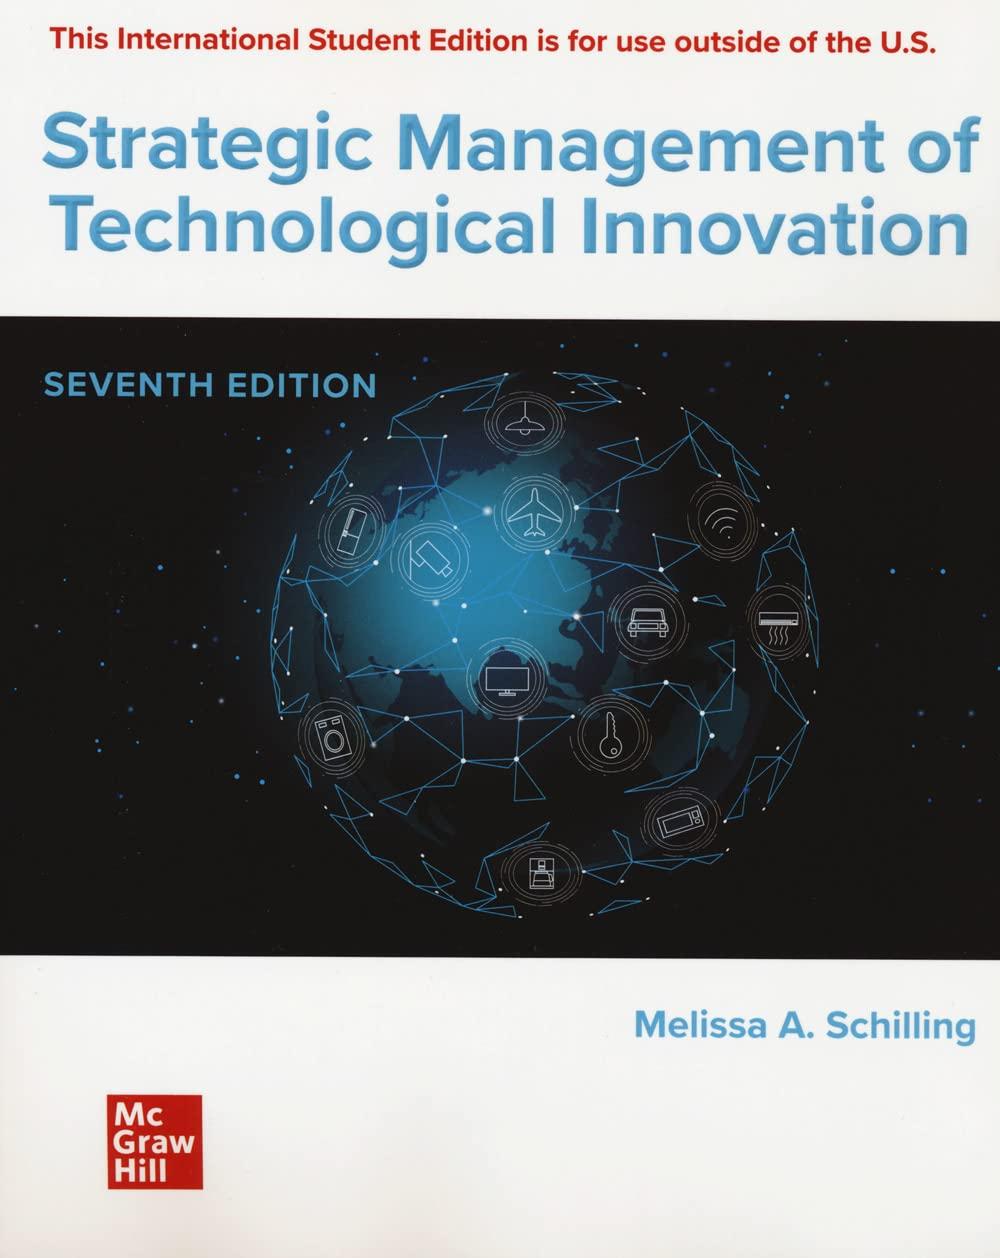 ise strategic management of technological innovation 7th international edition melissa a. schilling